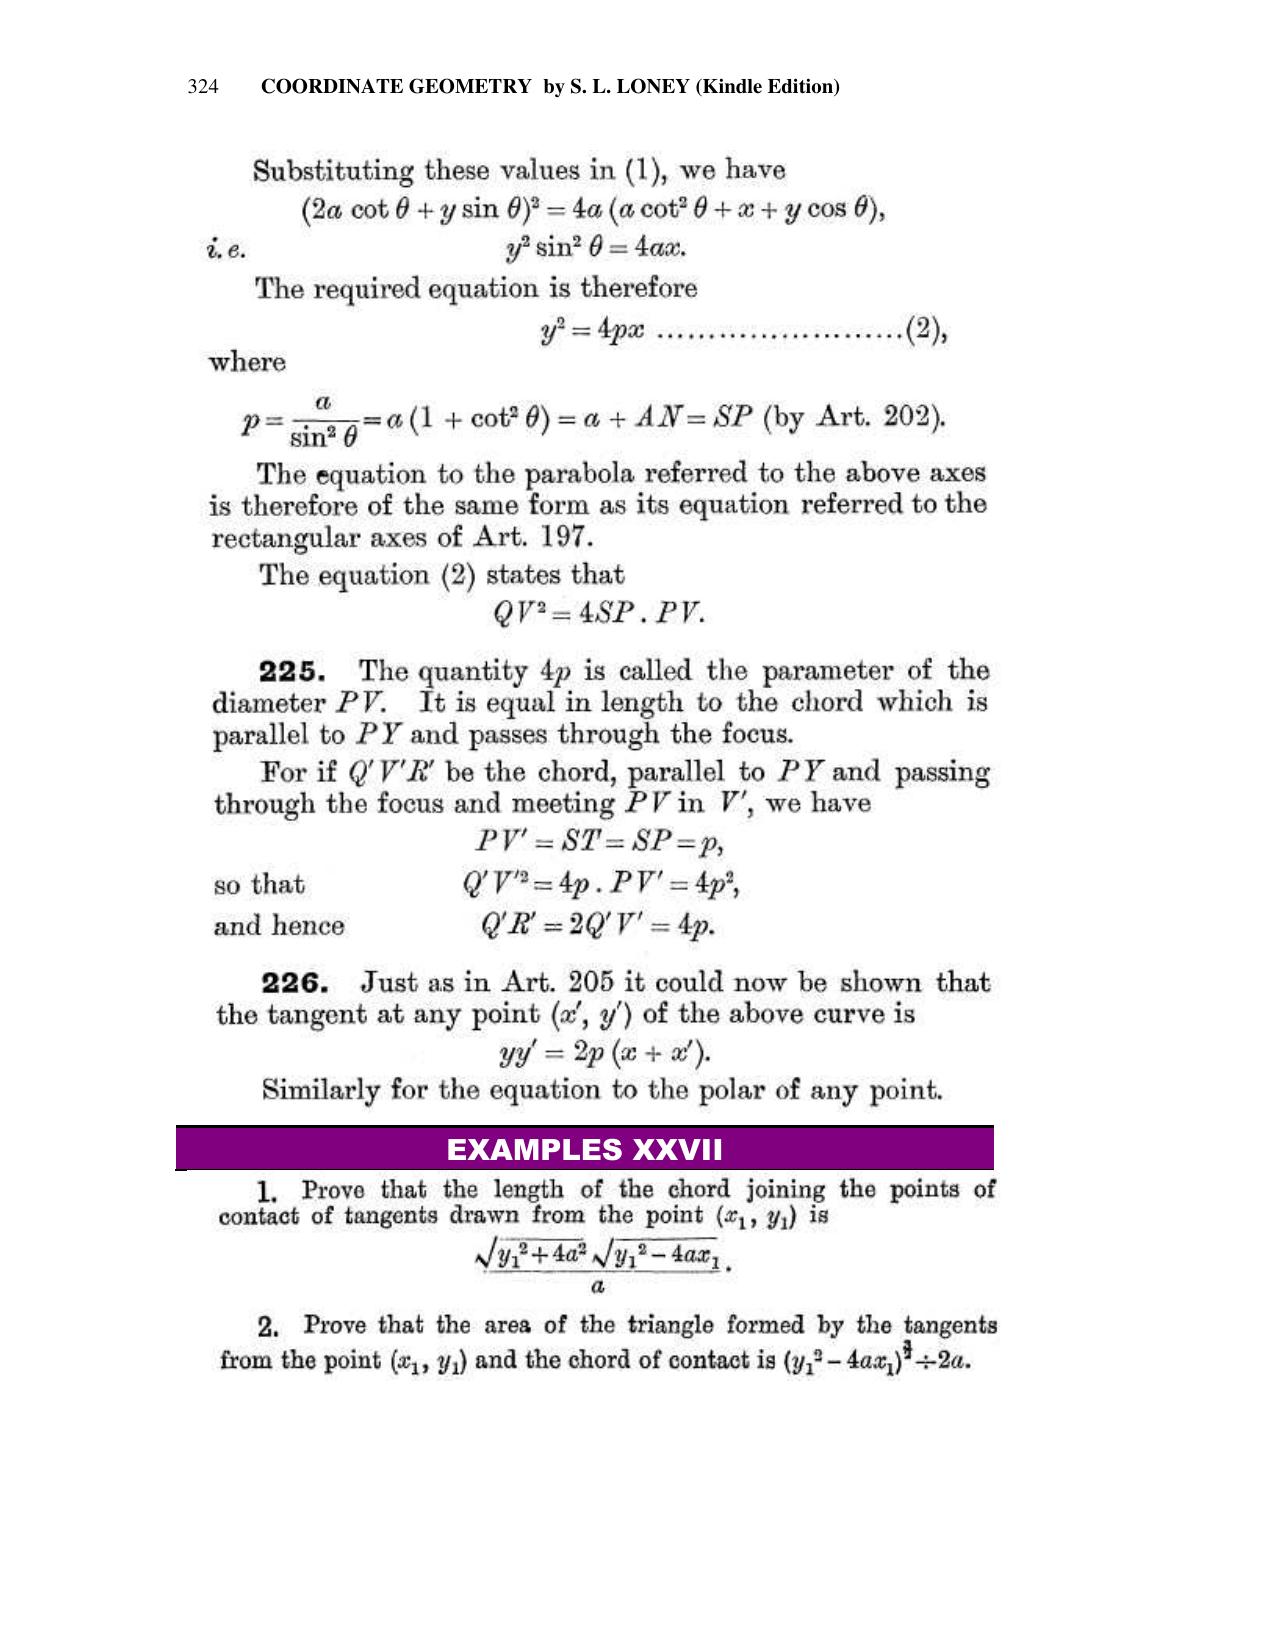 Chapter 10: The Parabola - SL Loney Solutions: The Elements of Coordinate Geometry - Page 38